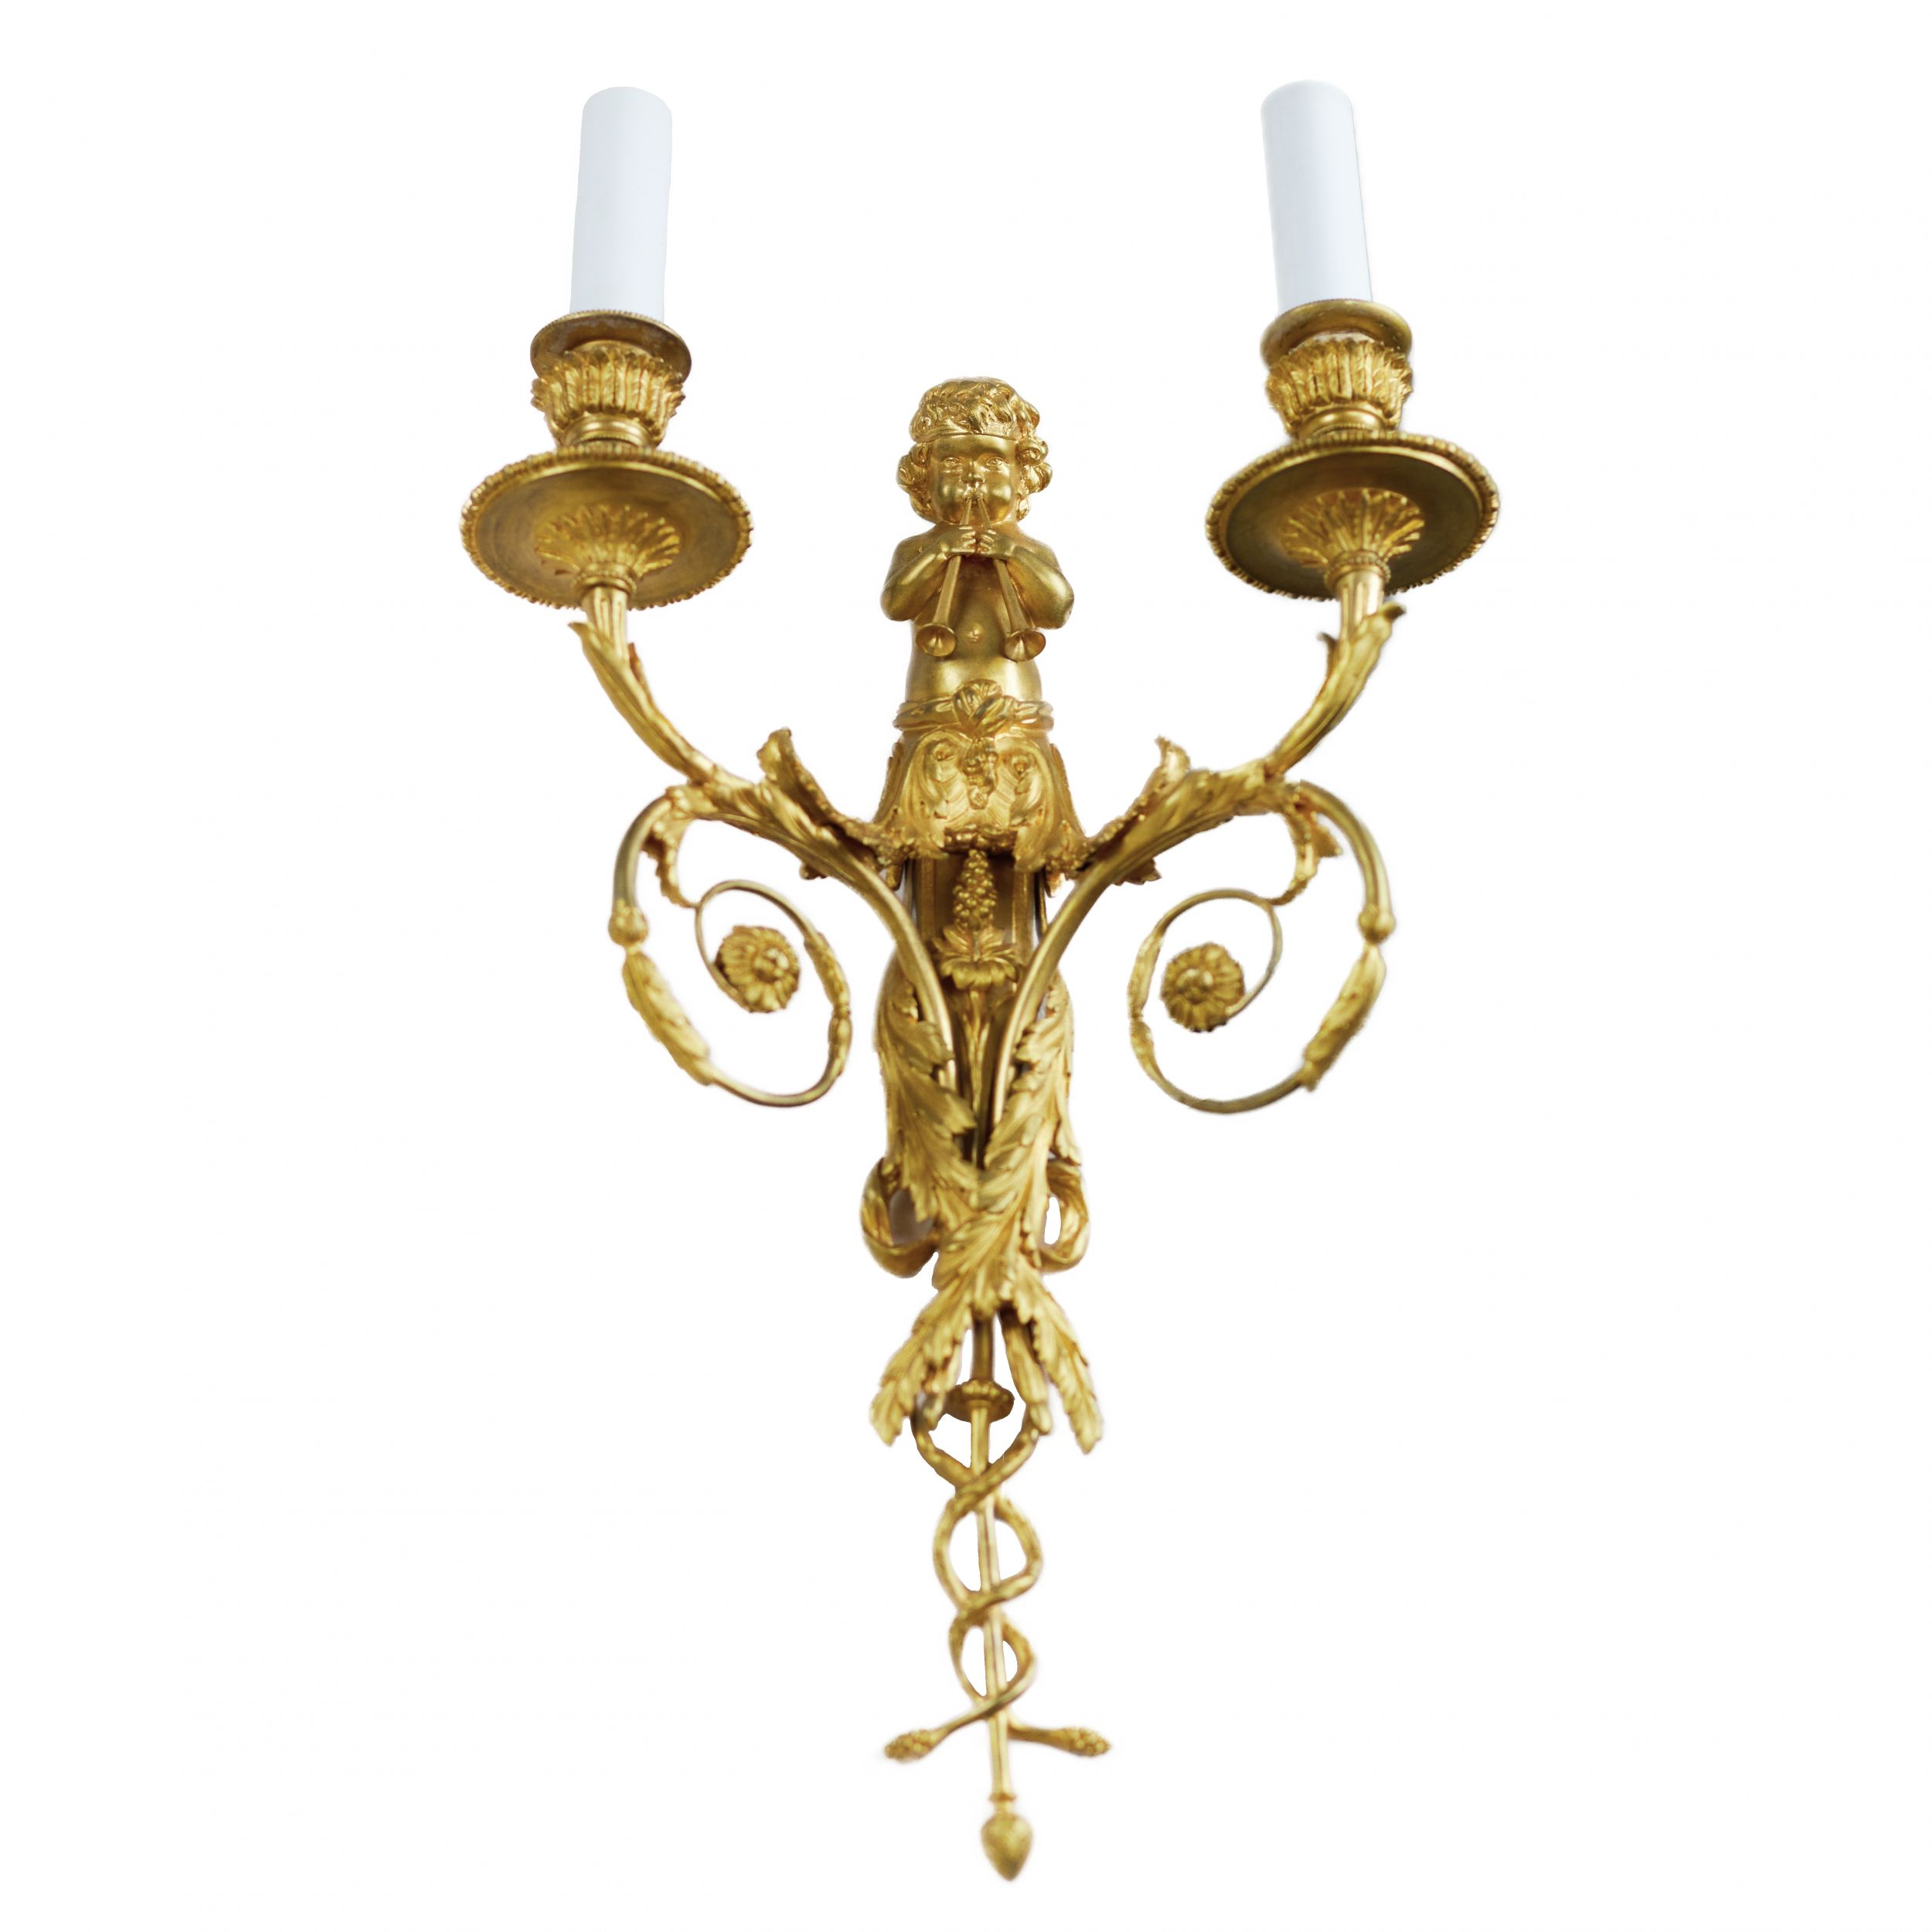 Pair of French gilt bronze sconces, Louis XVI style, 19th century. - Image 5 of 6